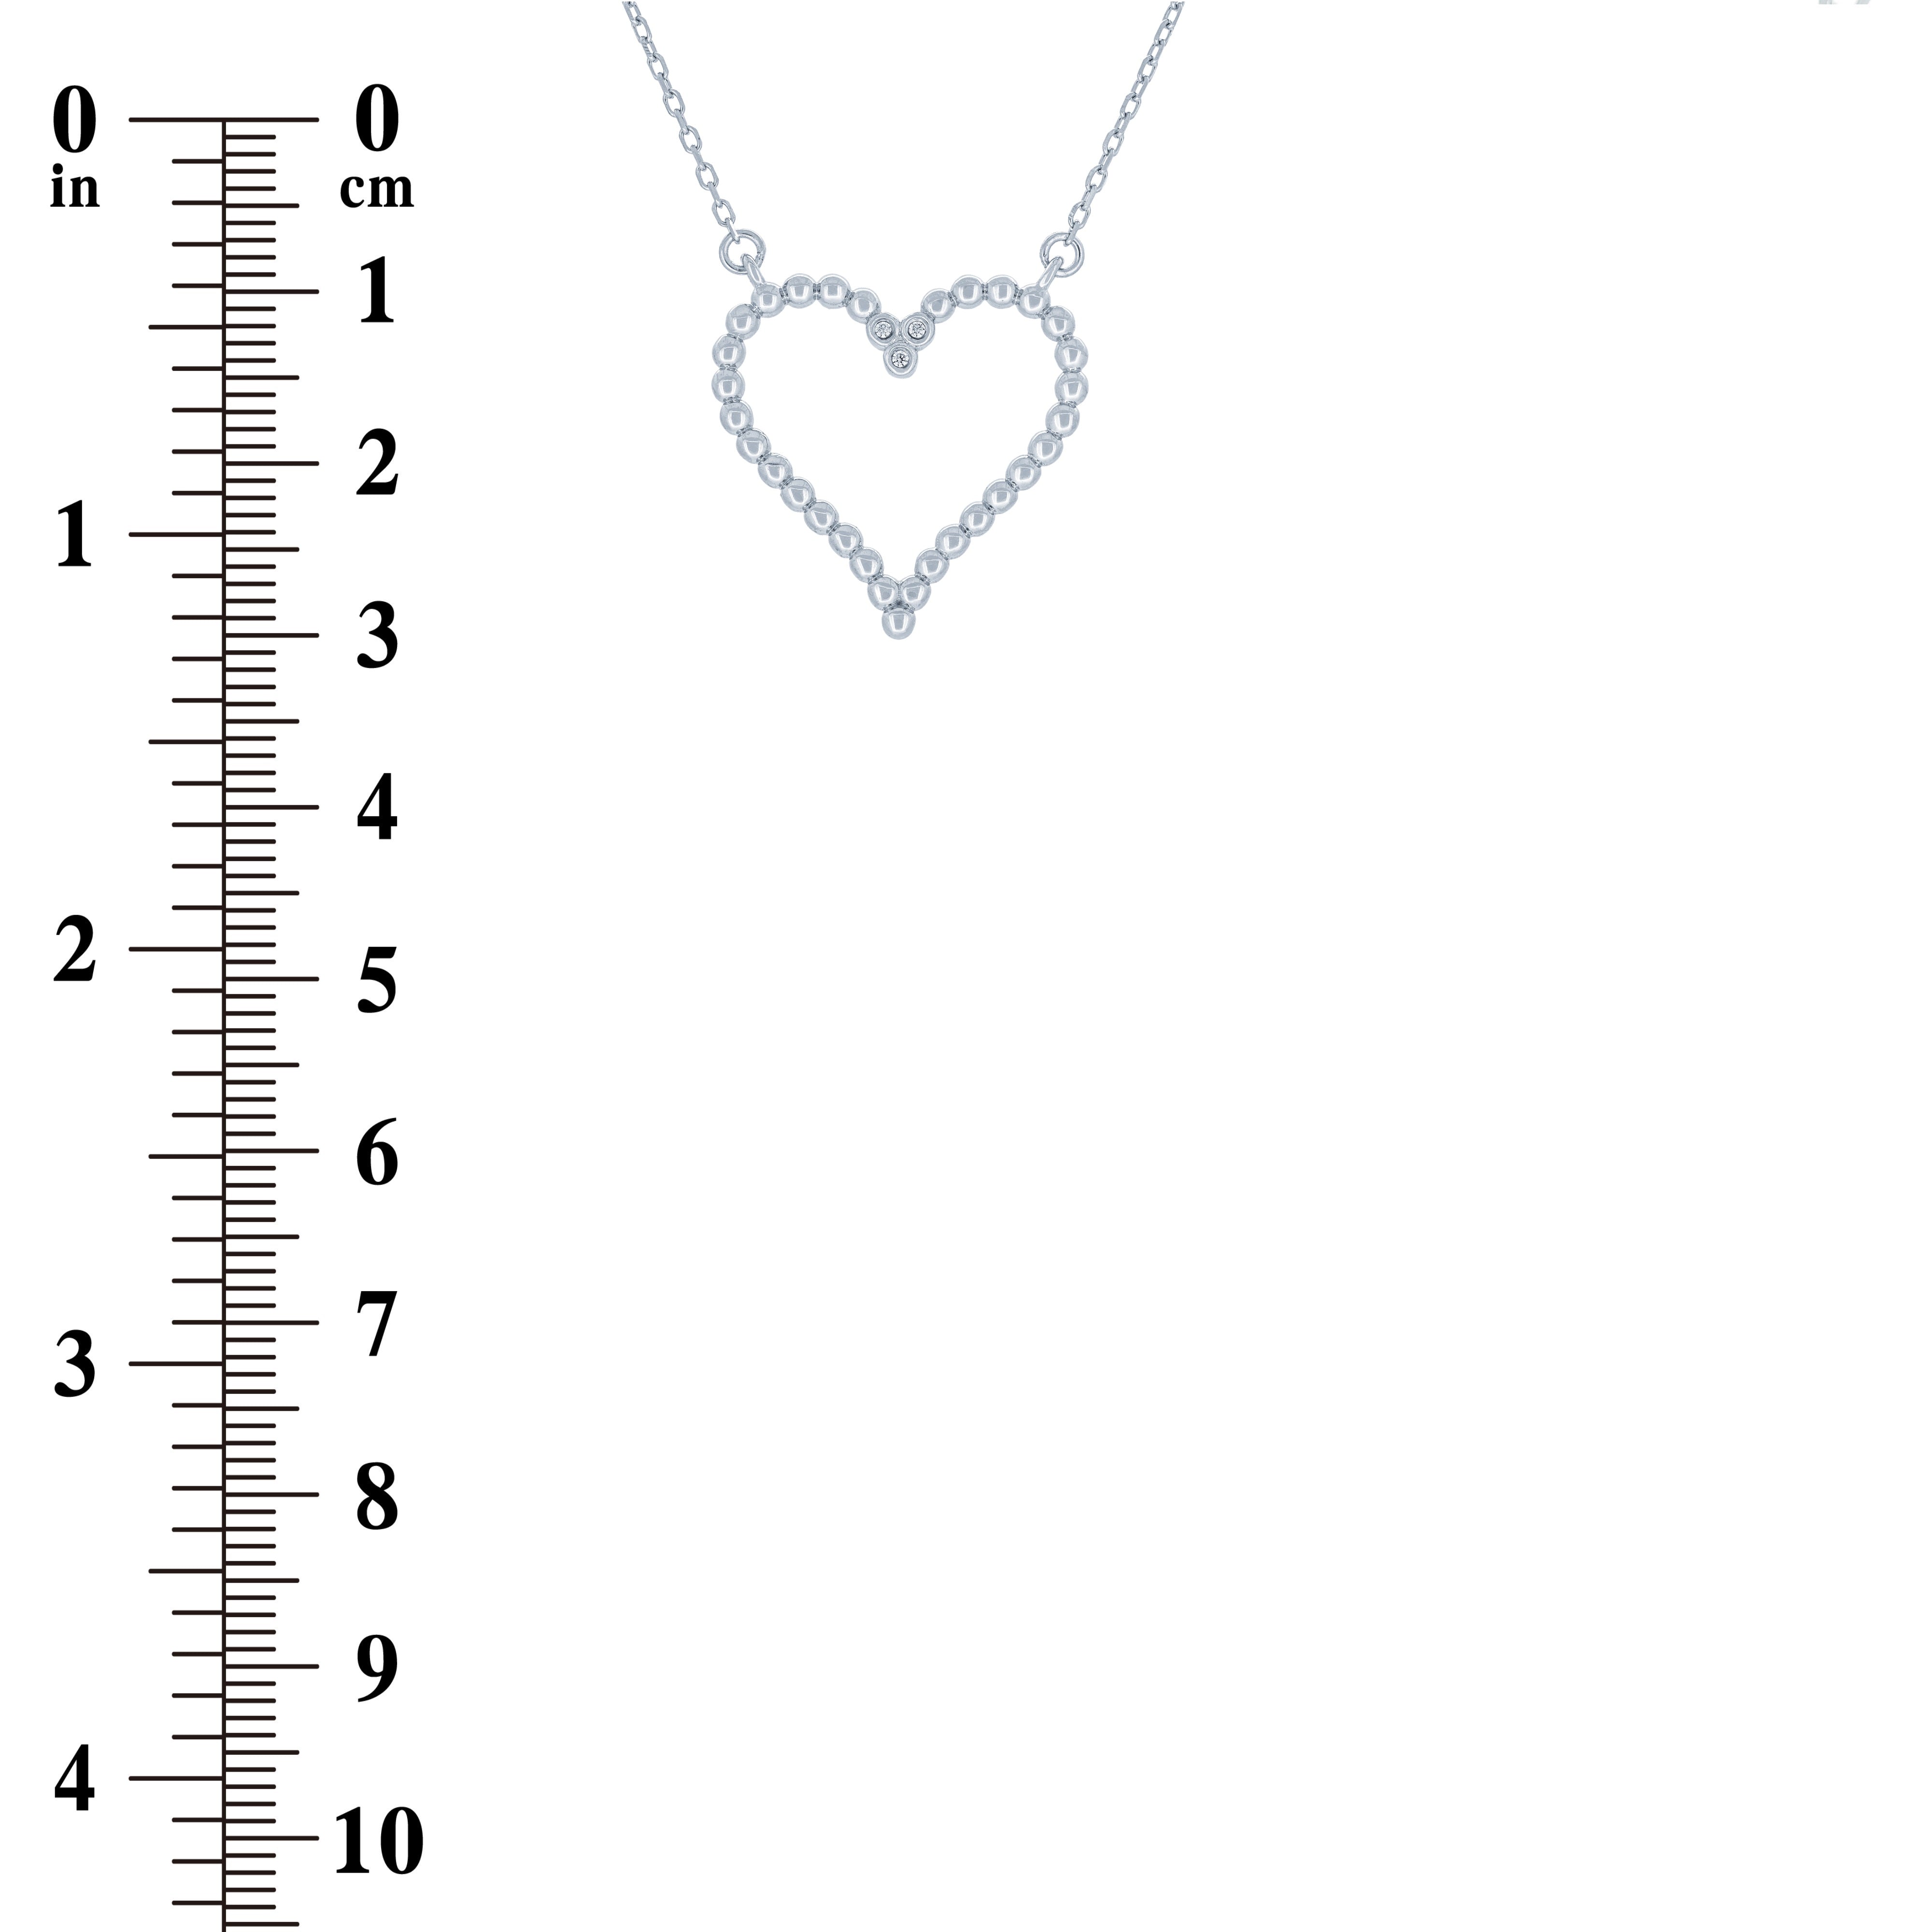 (100070) White Cubic Zirconia Heart Necklace In Sterling Silver